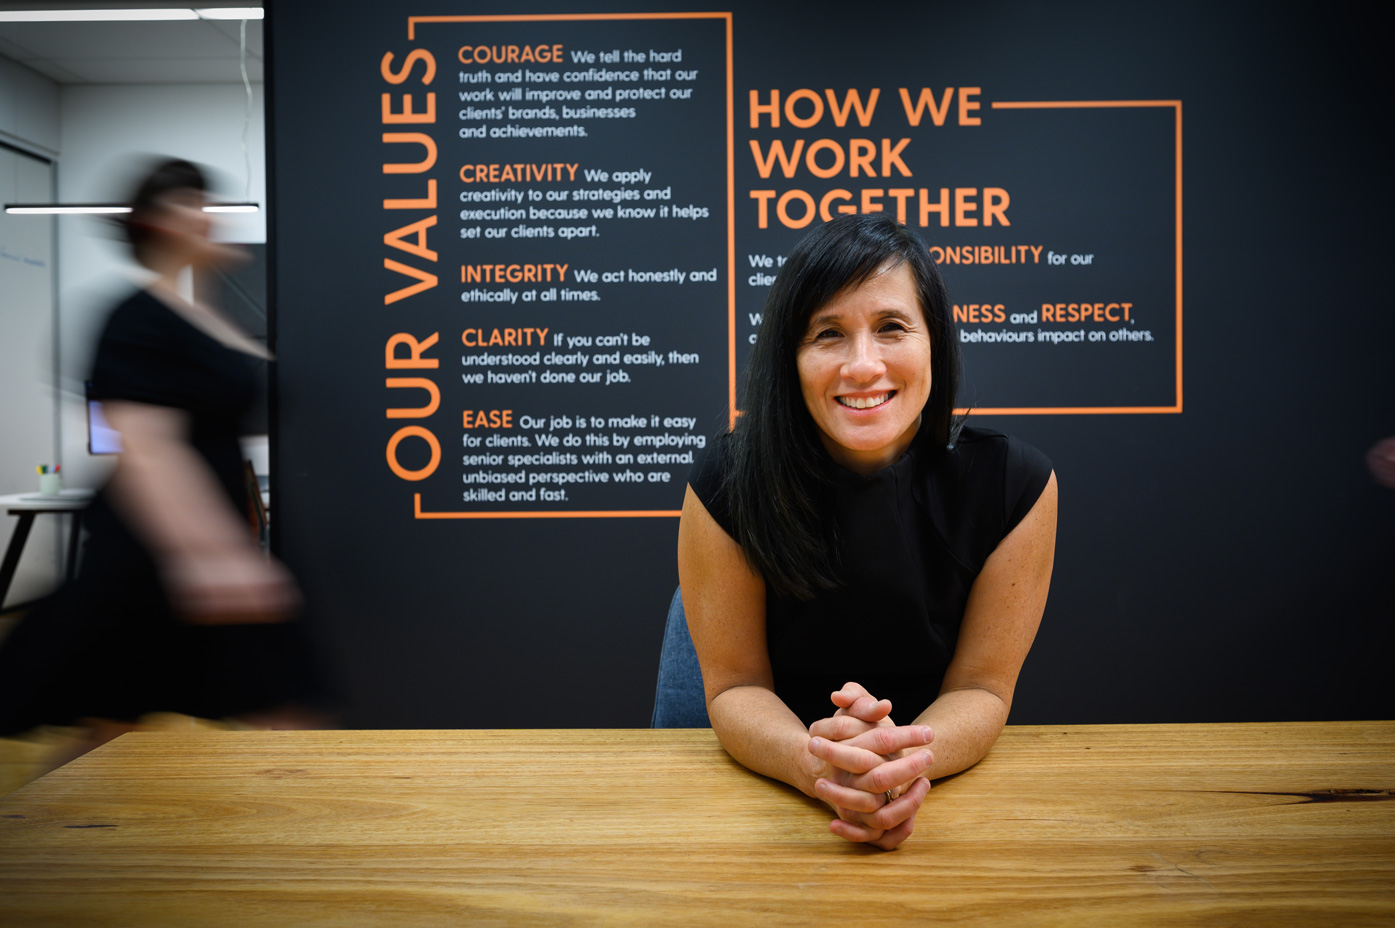 Amanda Newbery sitting at a desk smiling with her hands folded. Behind her is a dark wall with a decal displaying 'our values' and 'how we work together'